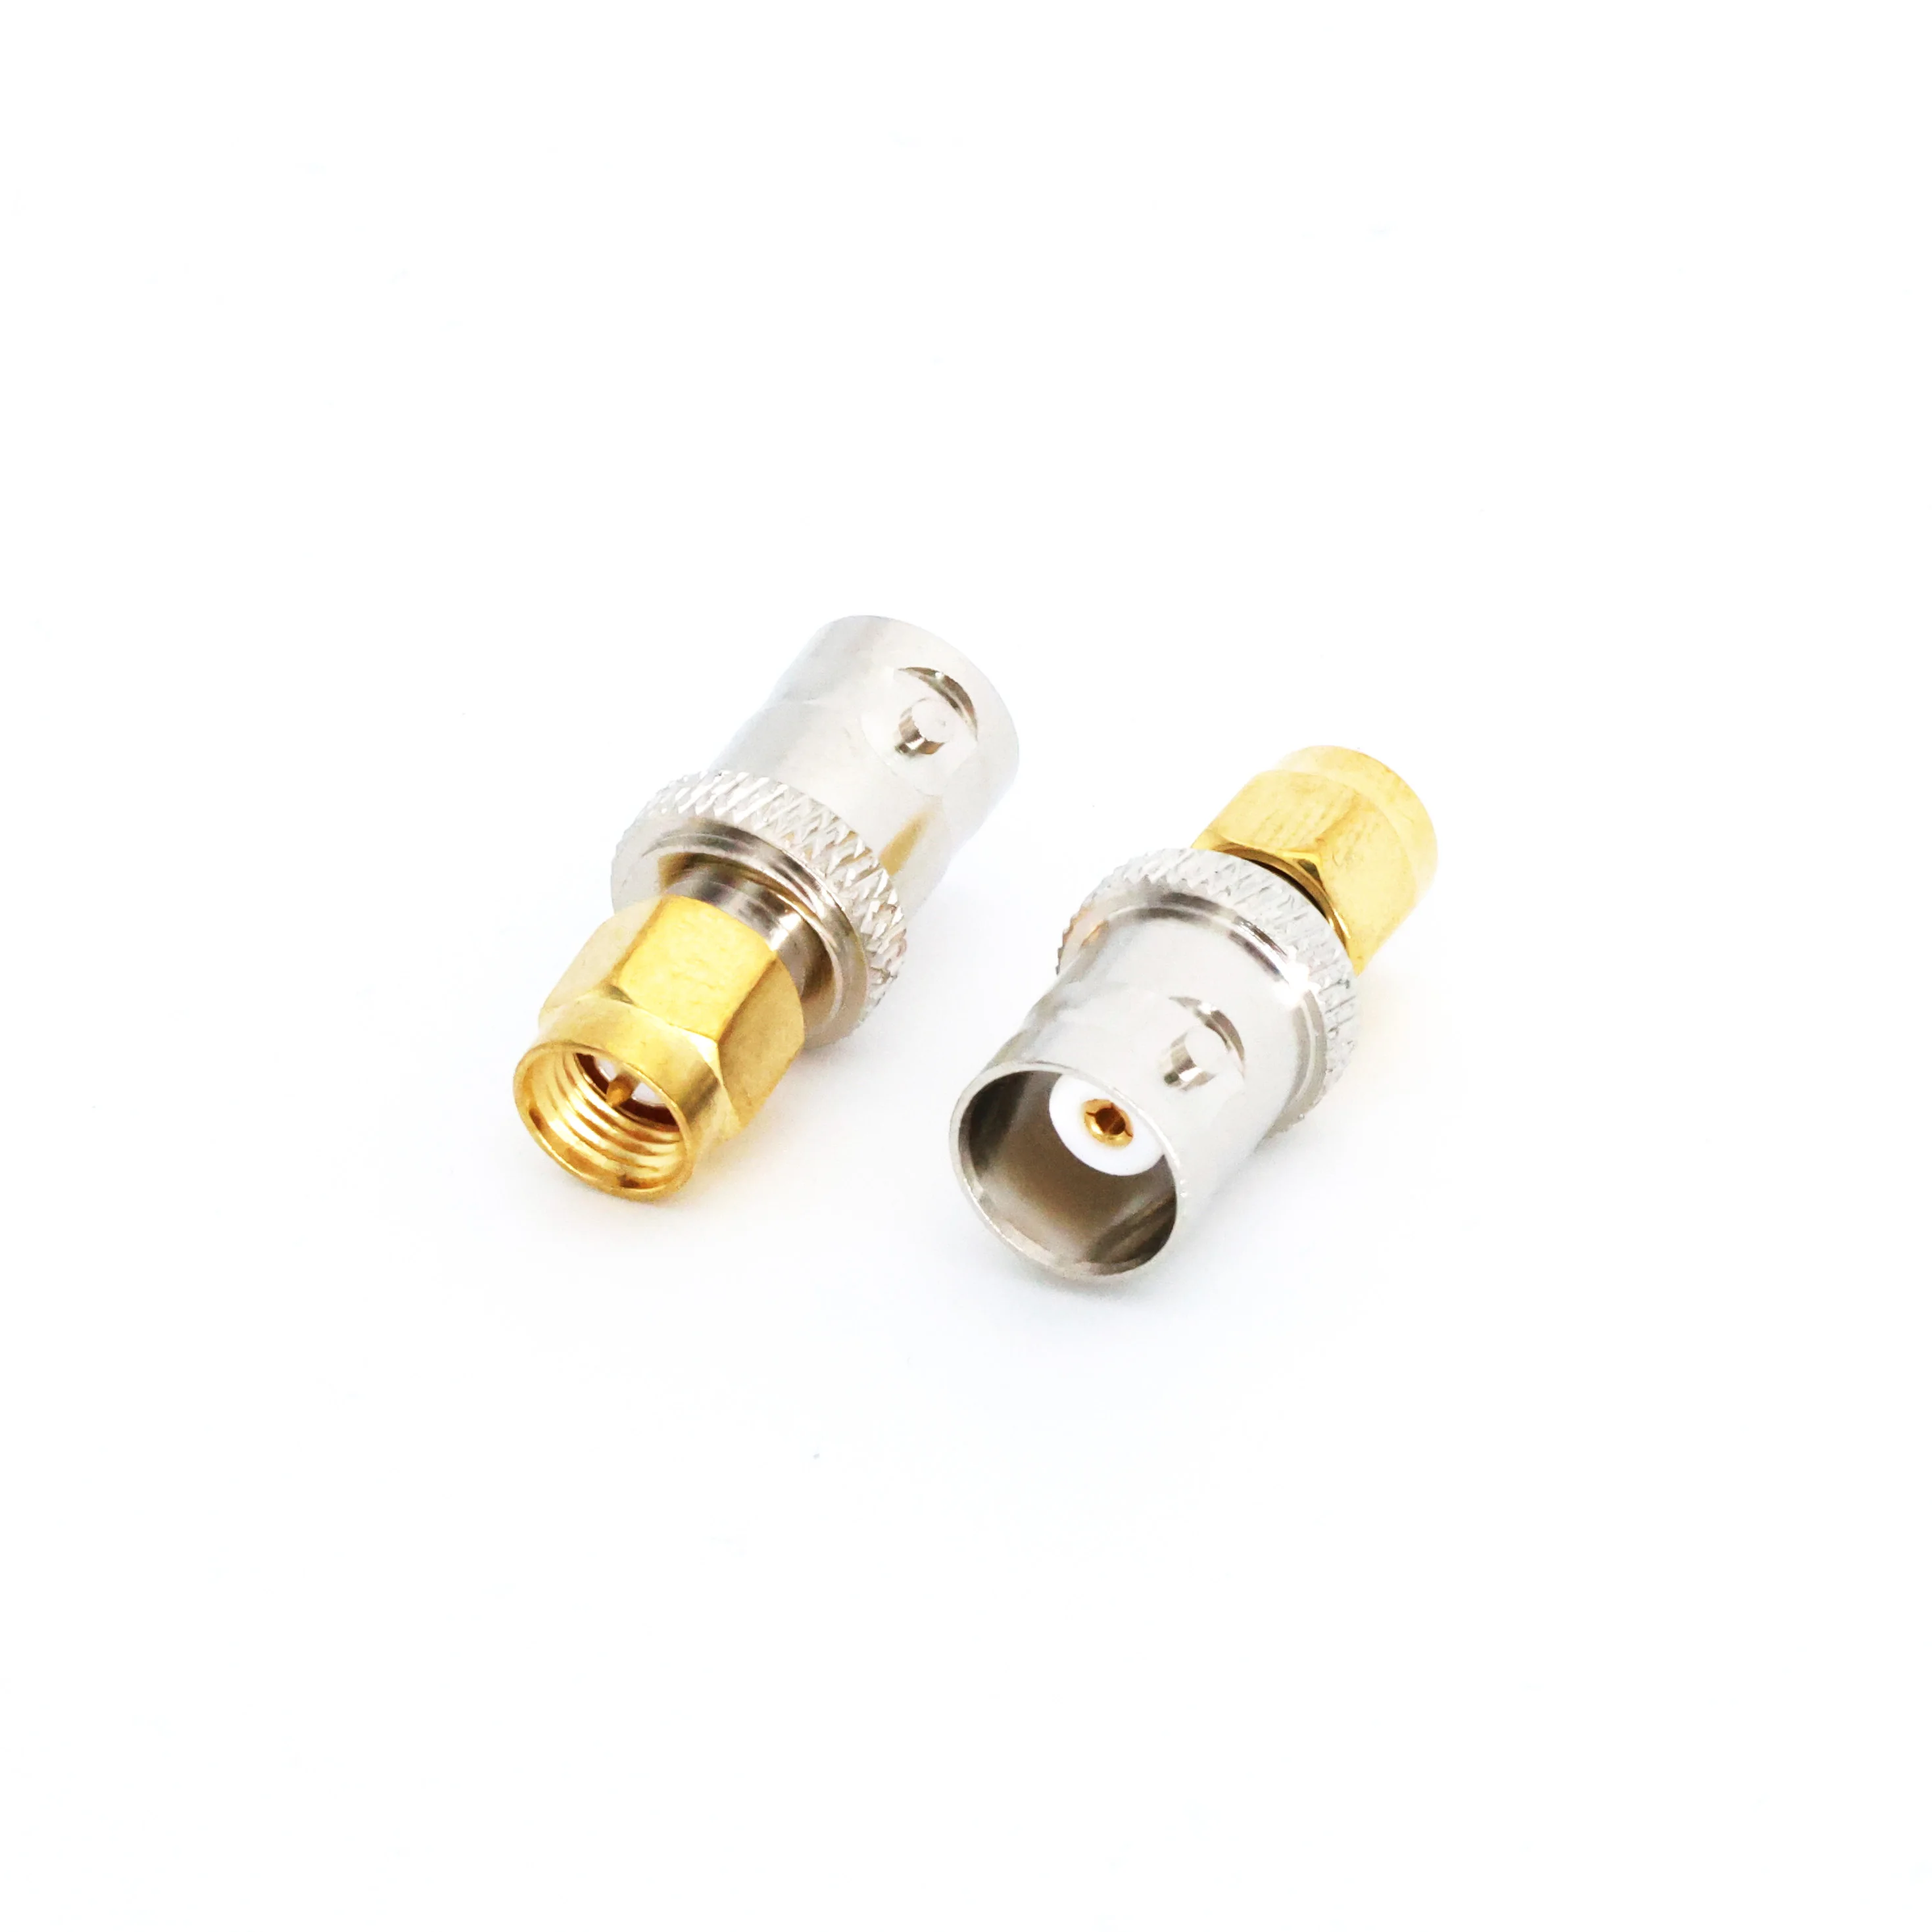 2pcs 1pair eizz ez 107 female rca jack terminal connector for hifi audio amp cd player 2pcs Coaxial connector SMA to BNC SMA (inner screw inner needle) to BNC female SMA-J/BNC-K adapter